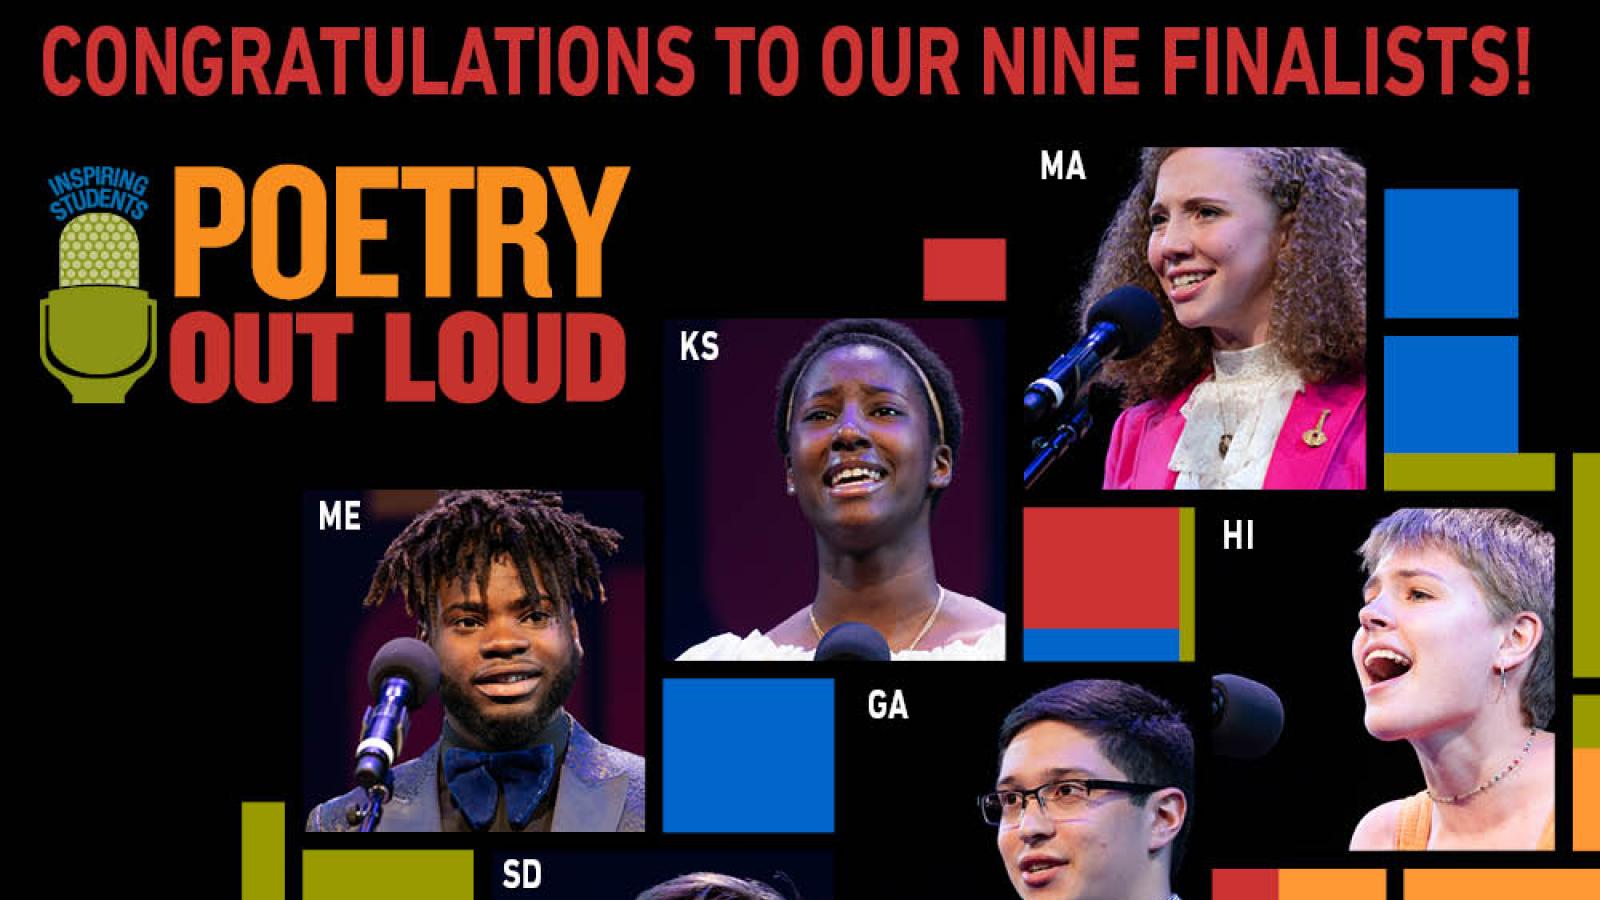 Final Contest for the Title of 2019 National Poetry Out Loud Champion on May 1, 2019 National